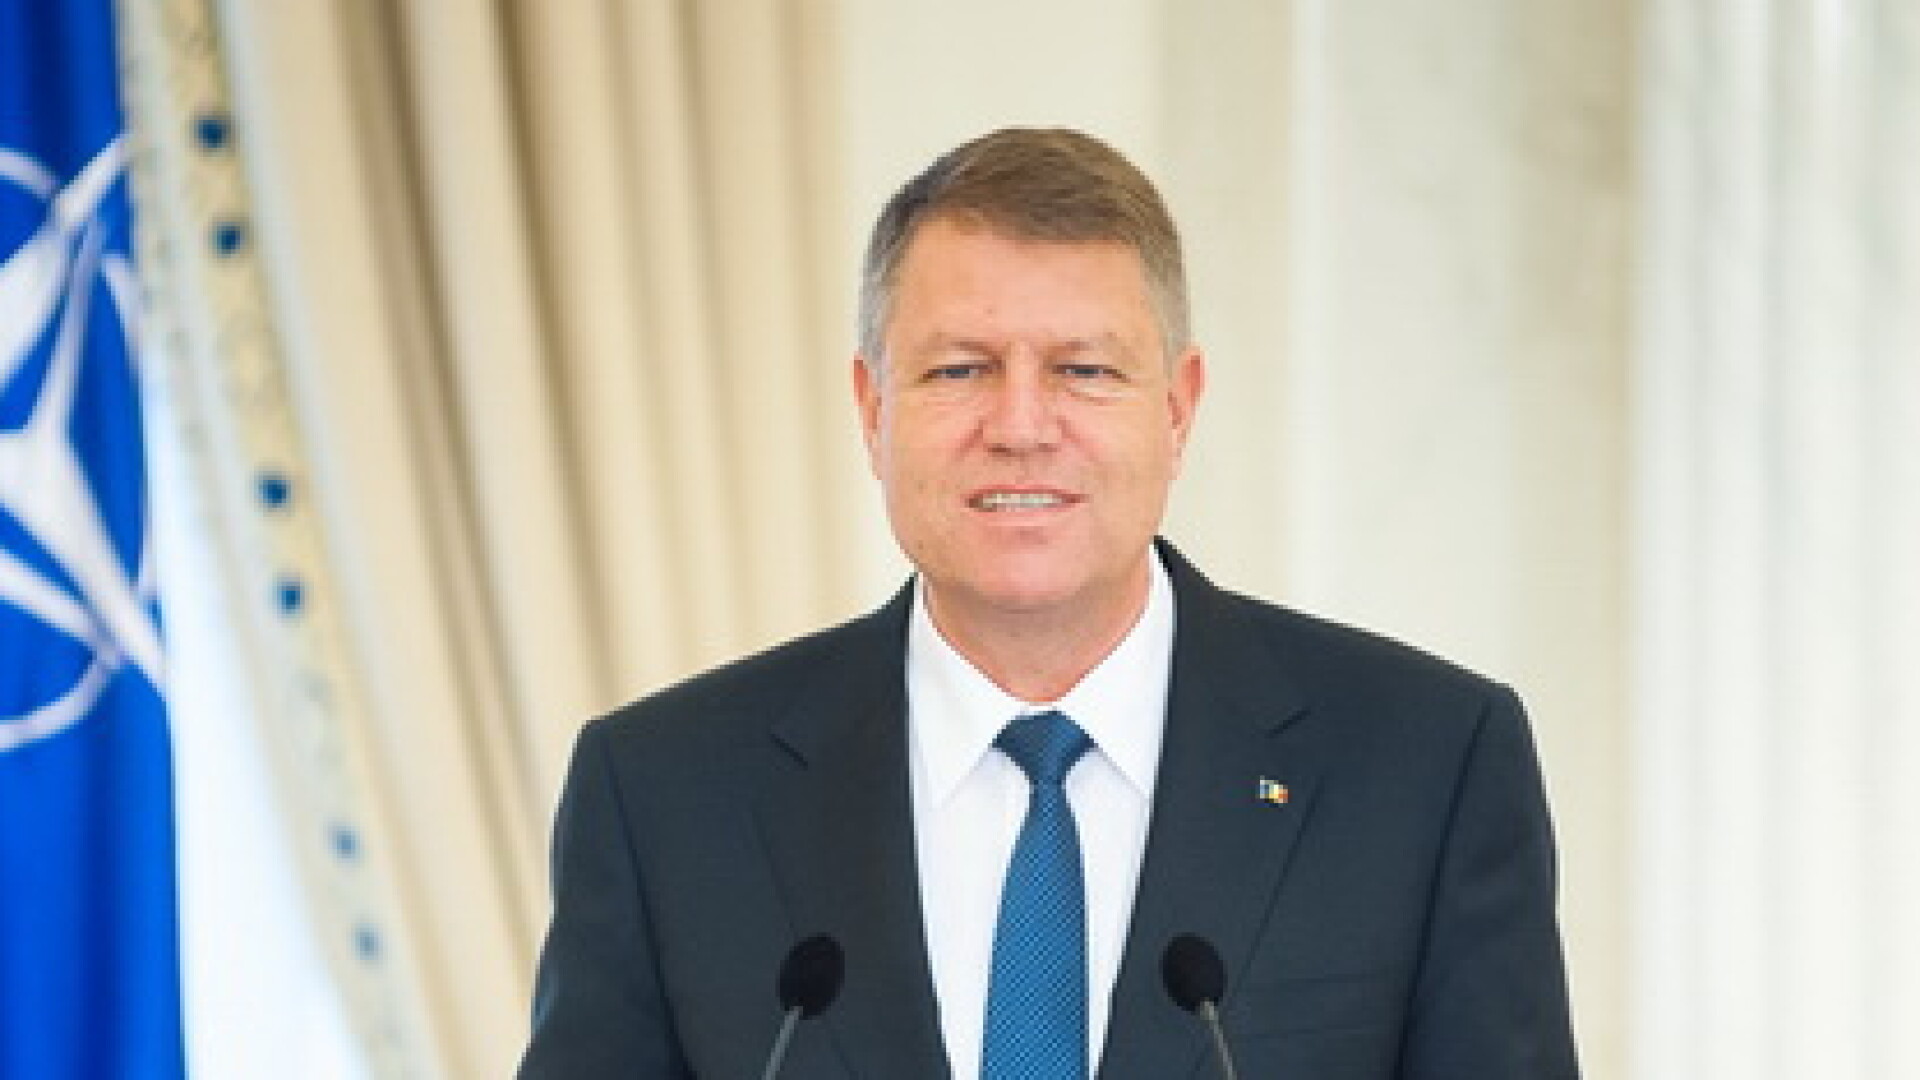 iohannis cover